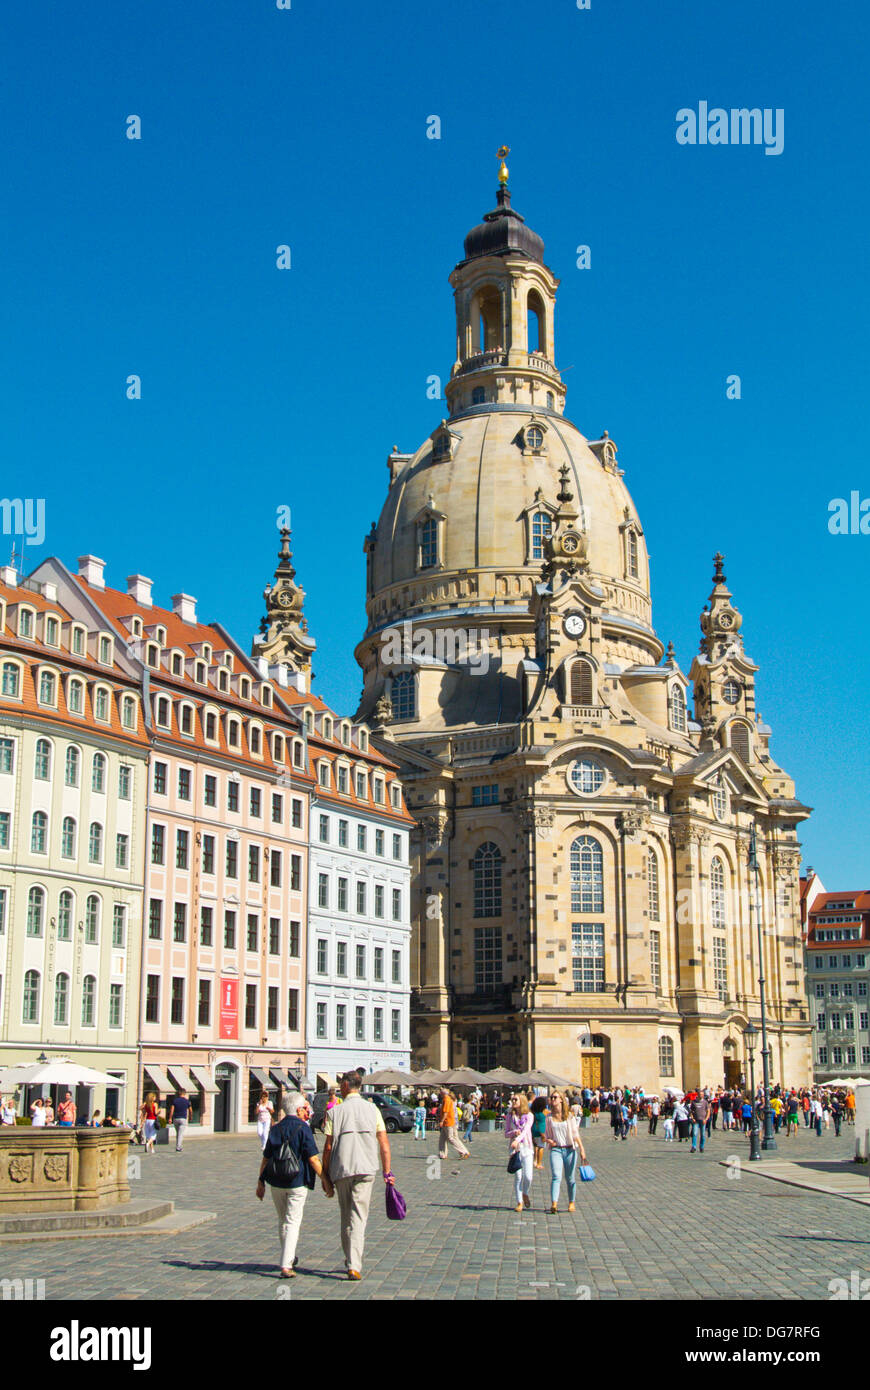 Frauenkirche church Neumarkt square Altstadt the old town Dresden city Germany central Europe Stock Photo